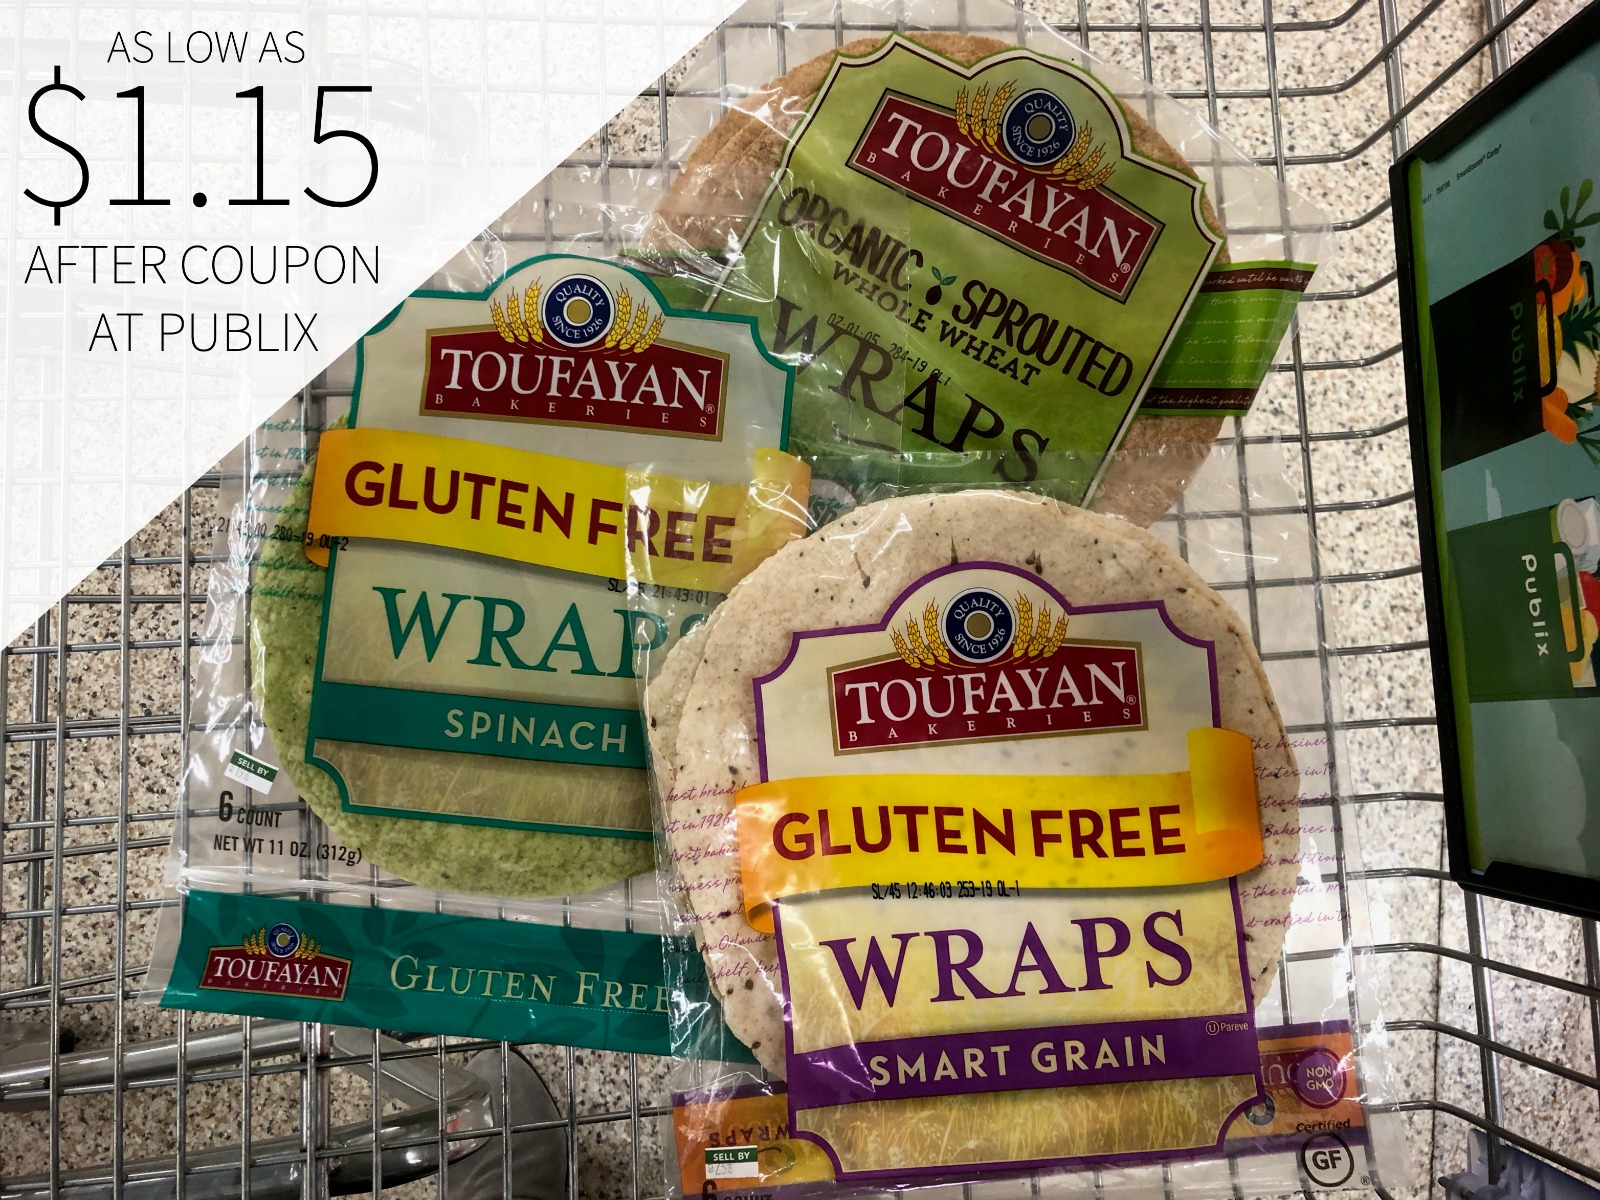 Grab A Fantastic Deal On Toufayan Organic & Gluten Free Wraps At Publix – Buy One, Get One FREE!